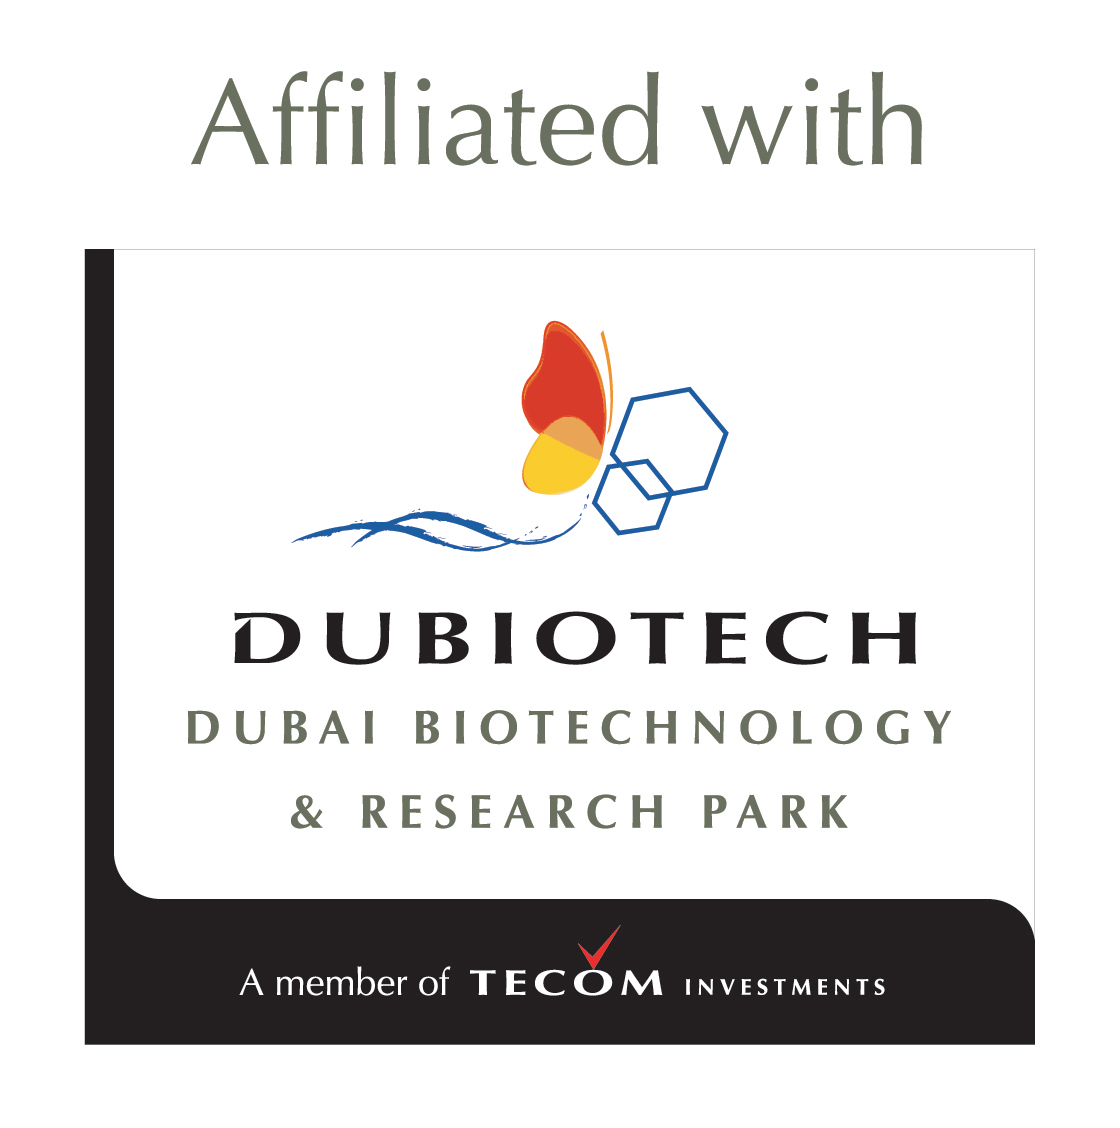 dubiotech_affiliated